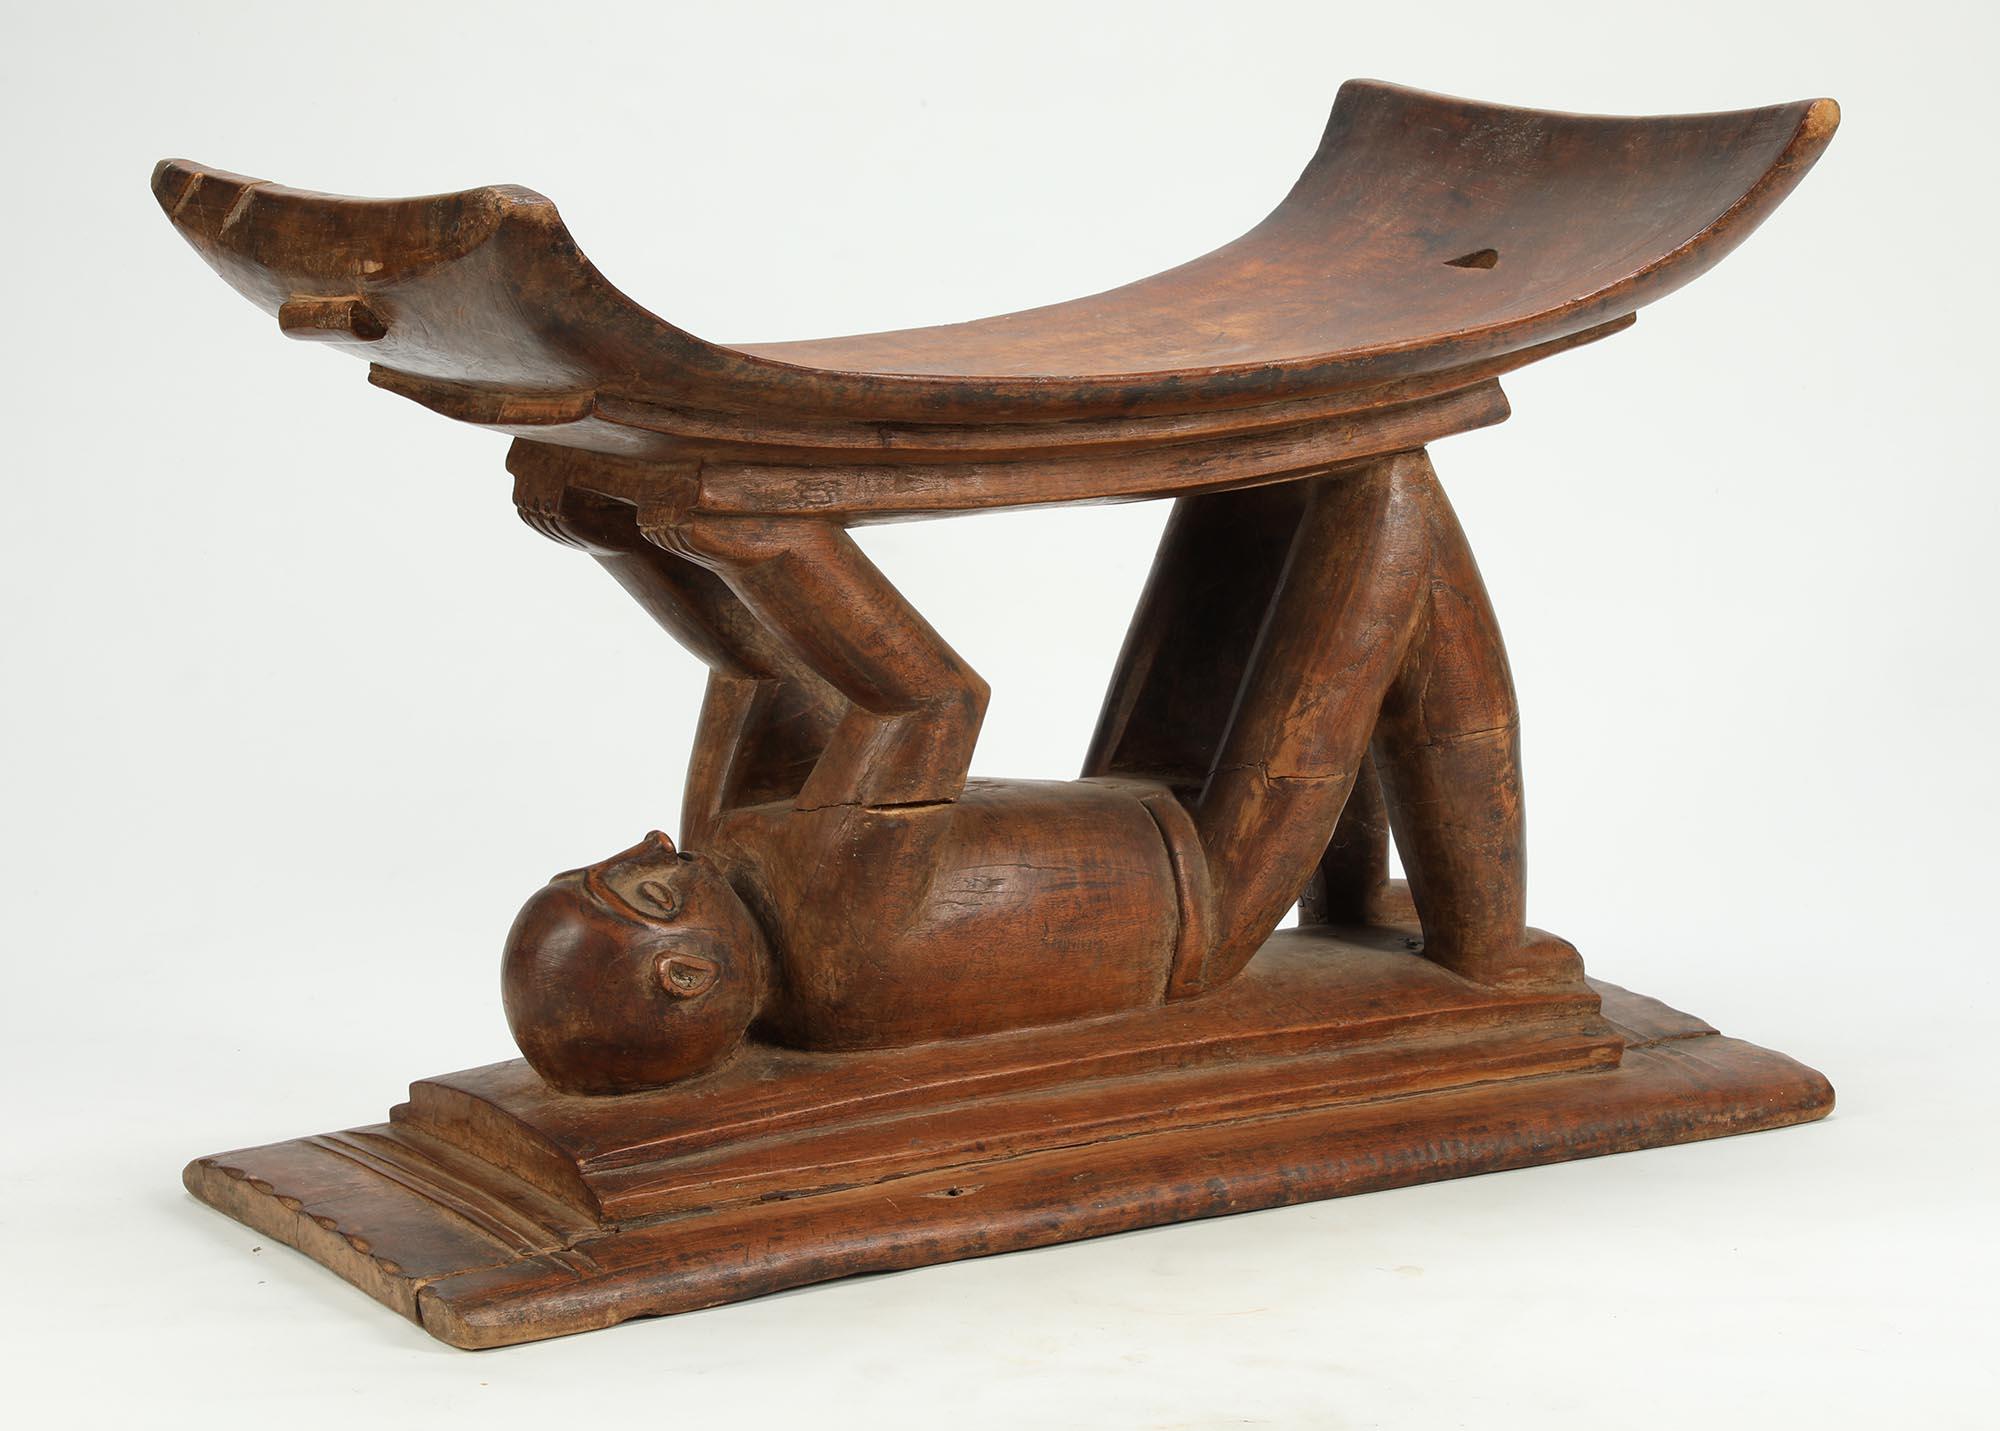 Hand-Carved Early Wood Ashanti Stool Reclining Figure Supporting Top, Ghana Mid 20th Century For Sale